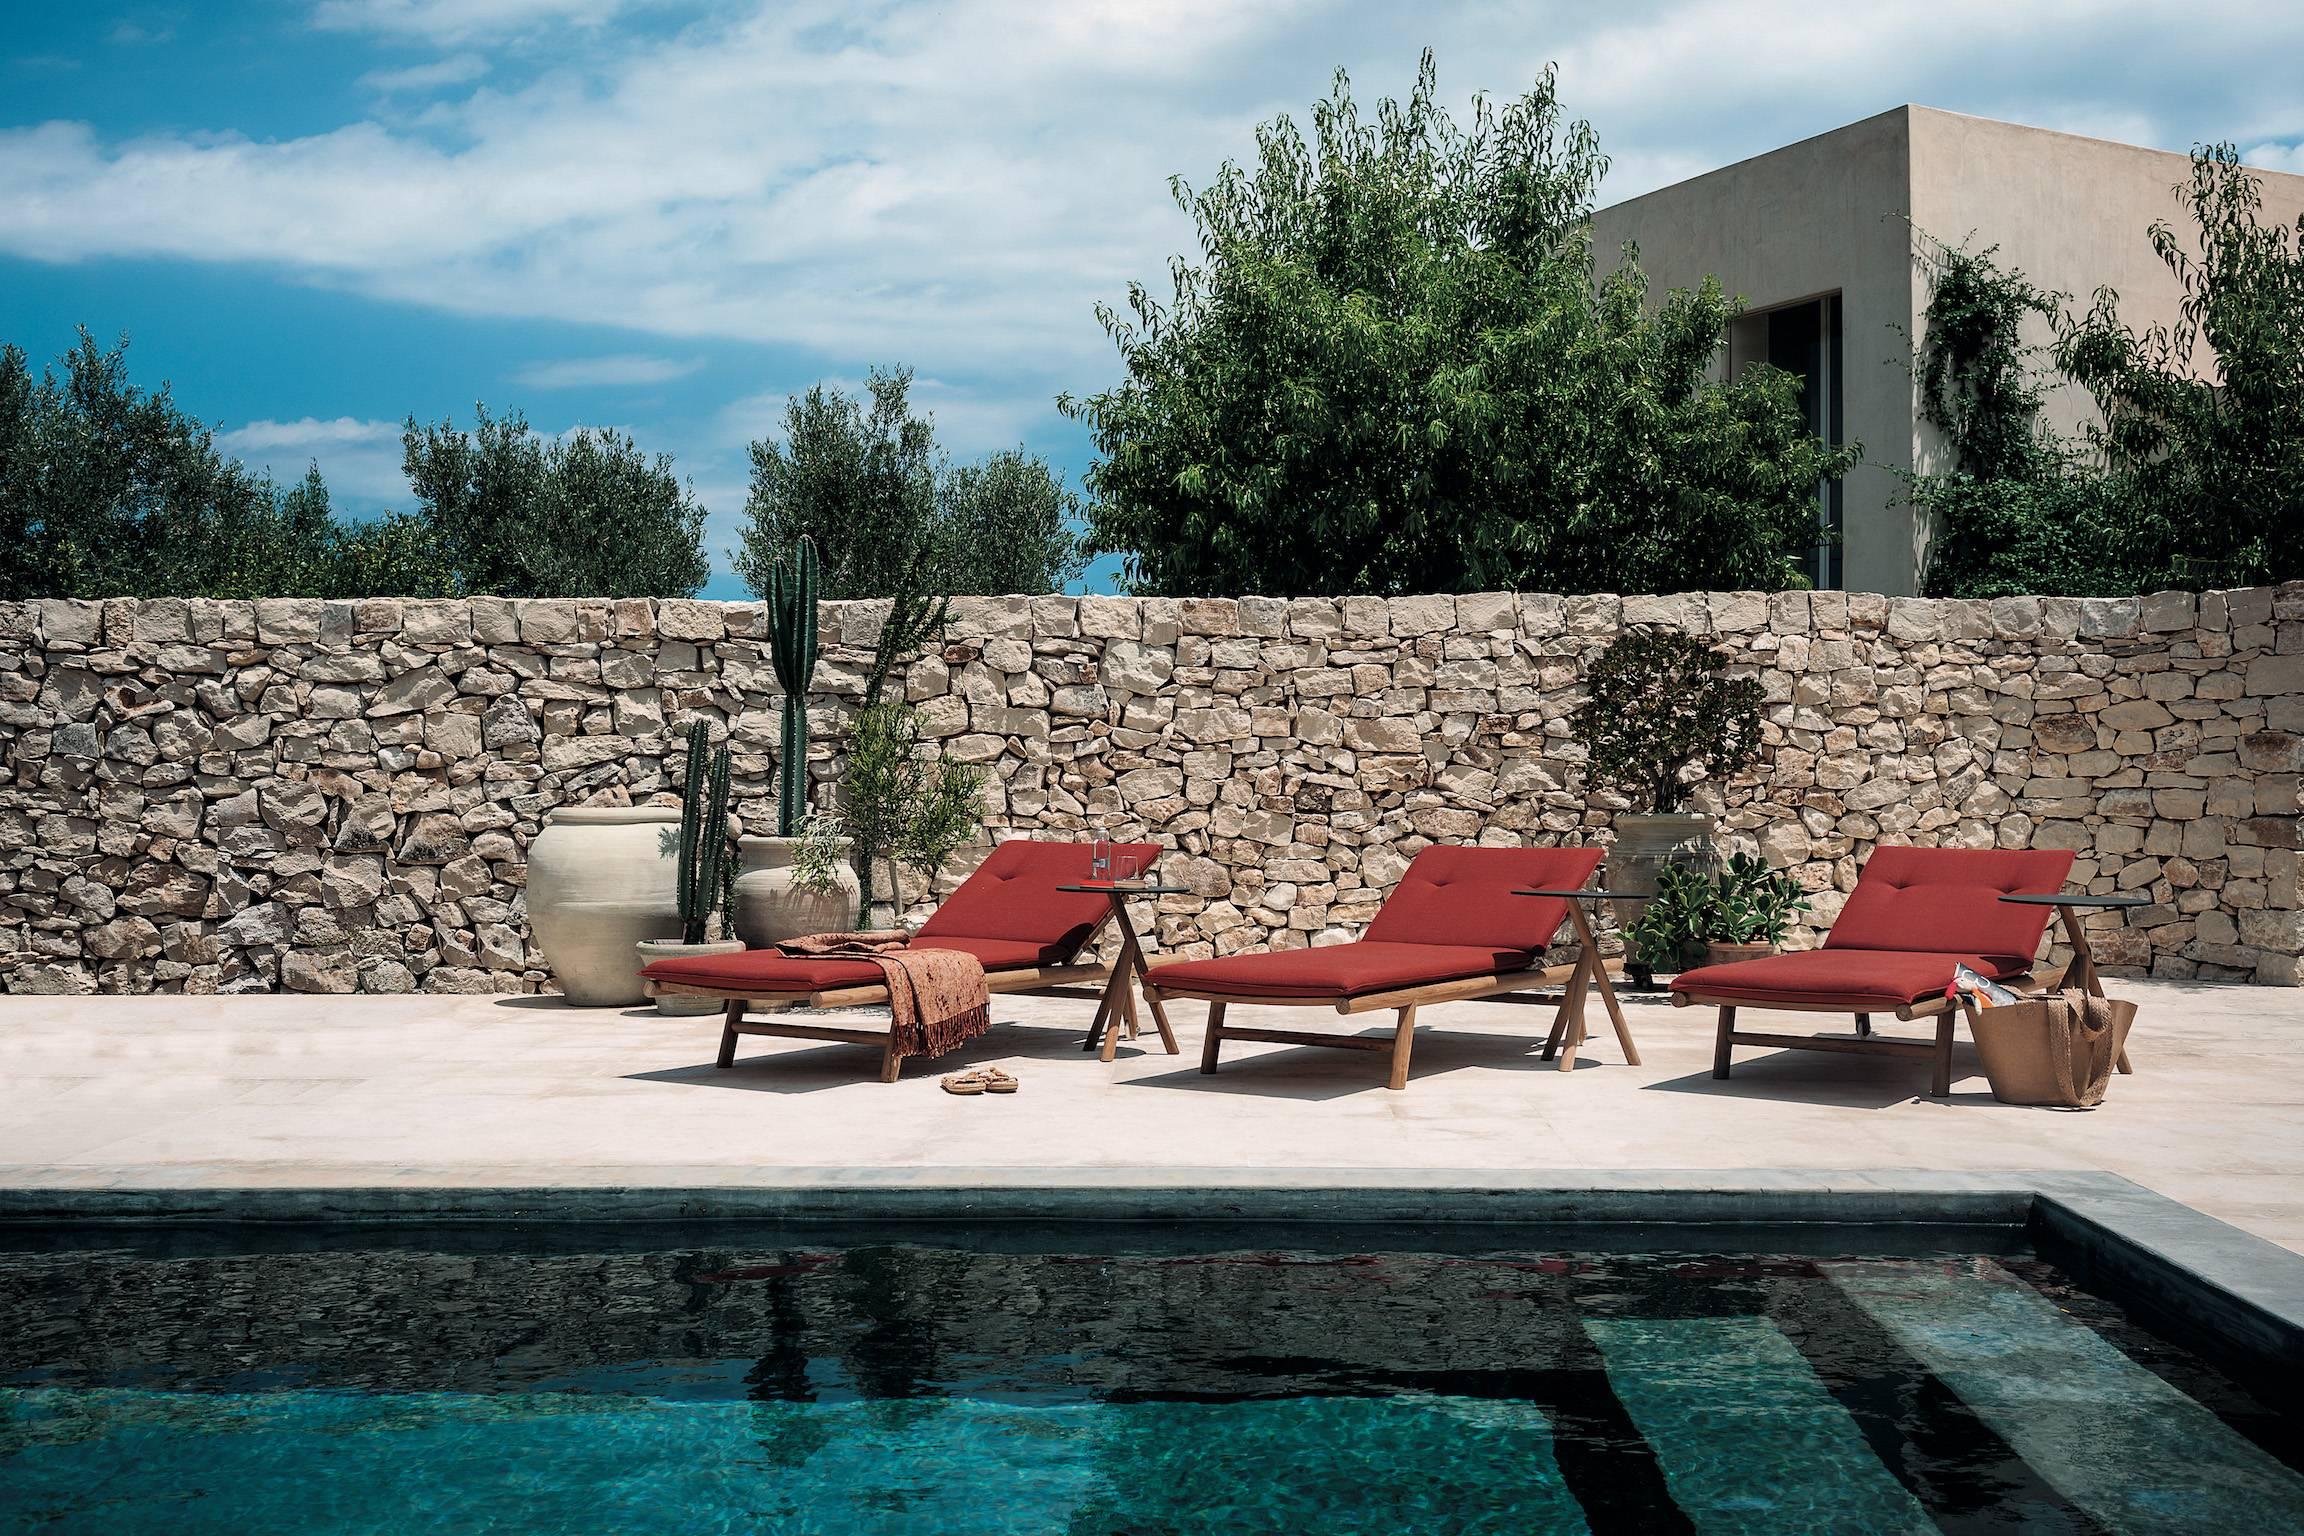 Orson sunlounger is the the synthesis of classic and contemporary. The harmonic and sinuous lines are the “fil rouge” between the items of this collection. Completely made in teak, it seems to have a simple design grammar, but conceals ingenious